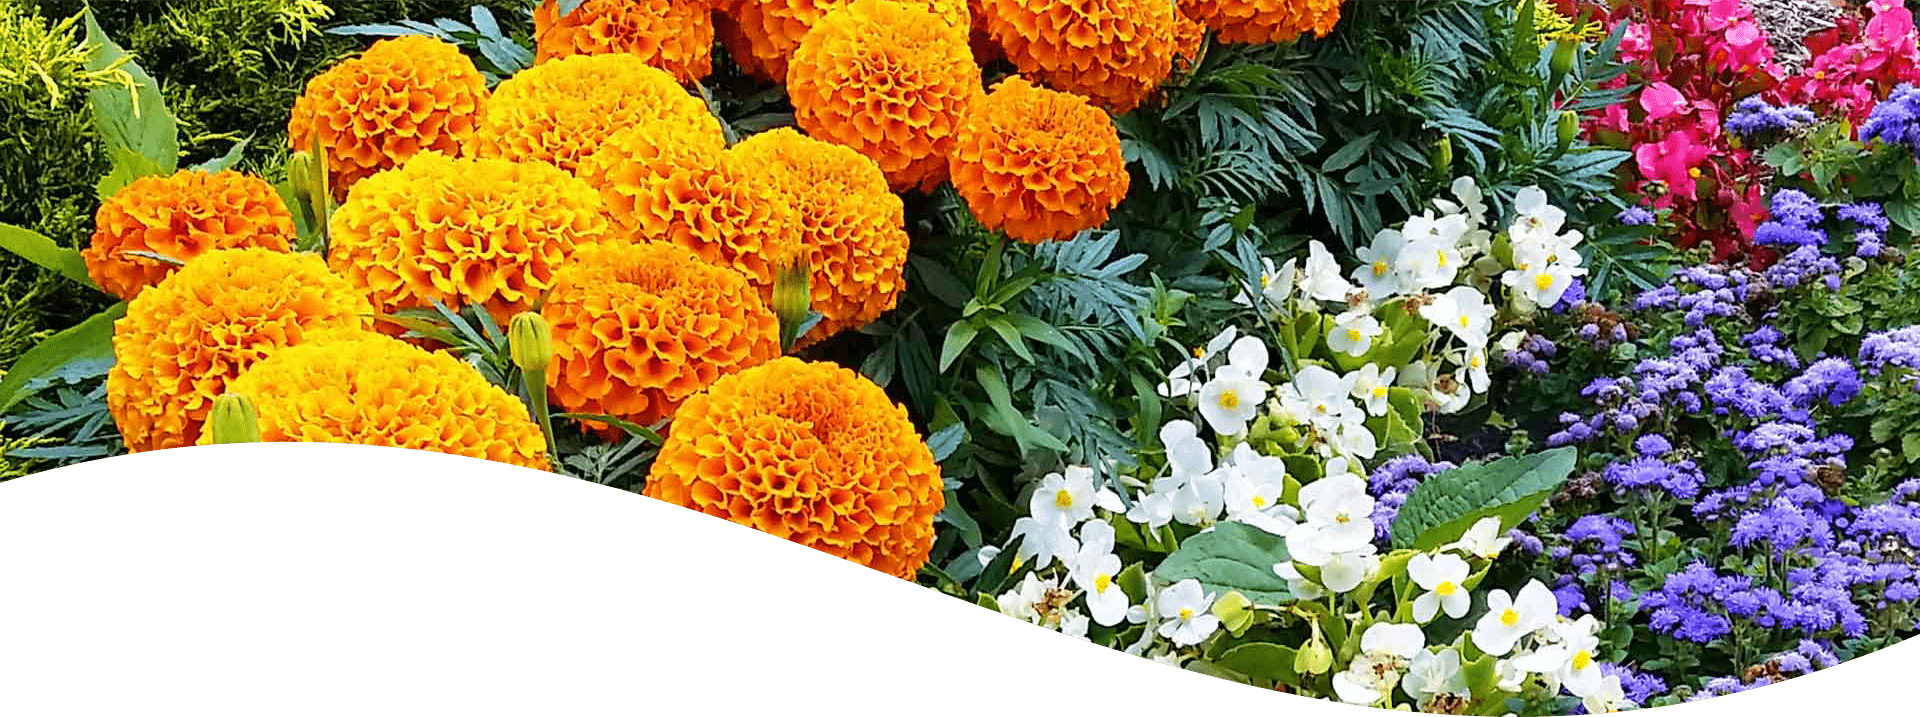 This image showcases a vibrant flower bed with large, orange marigolds, white and purple blooms, and verdant foliage, arranged in a lush, appealing garden display.